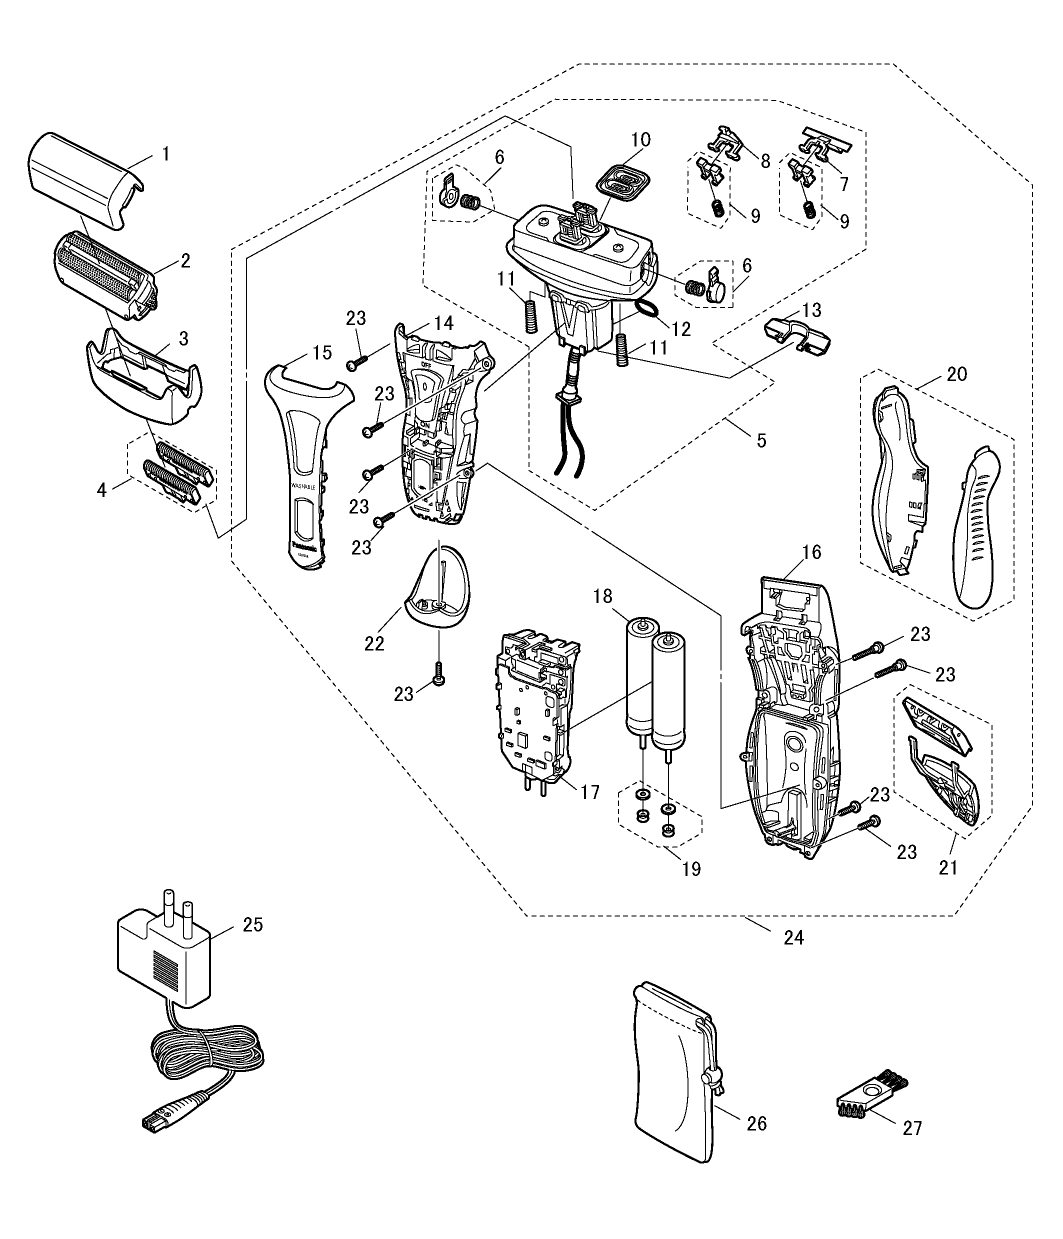 ES-RT40: Exploded View